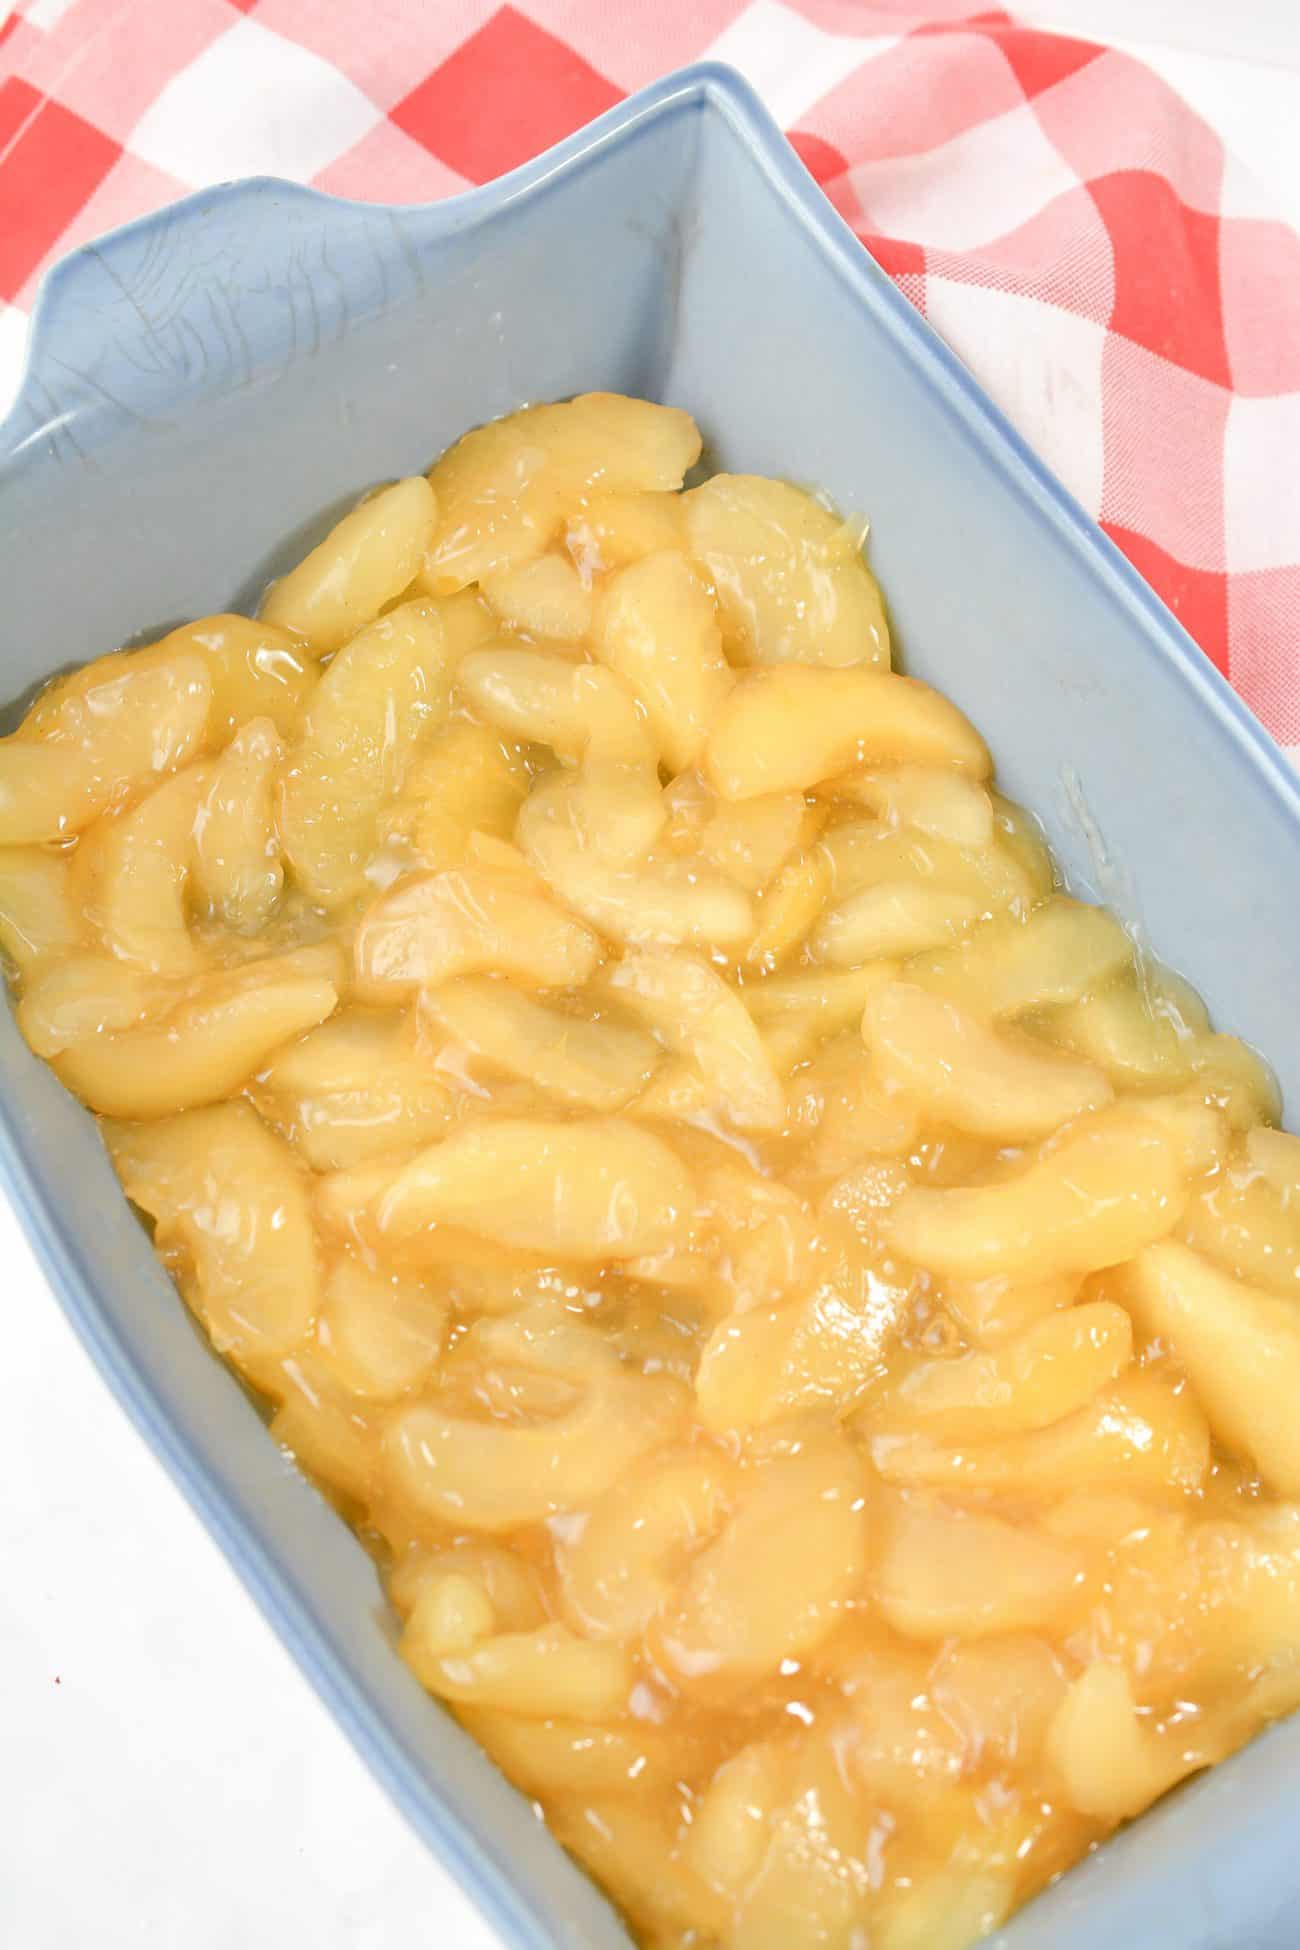 Add the apple pie filling in an even layer to the baking dish.